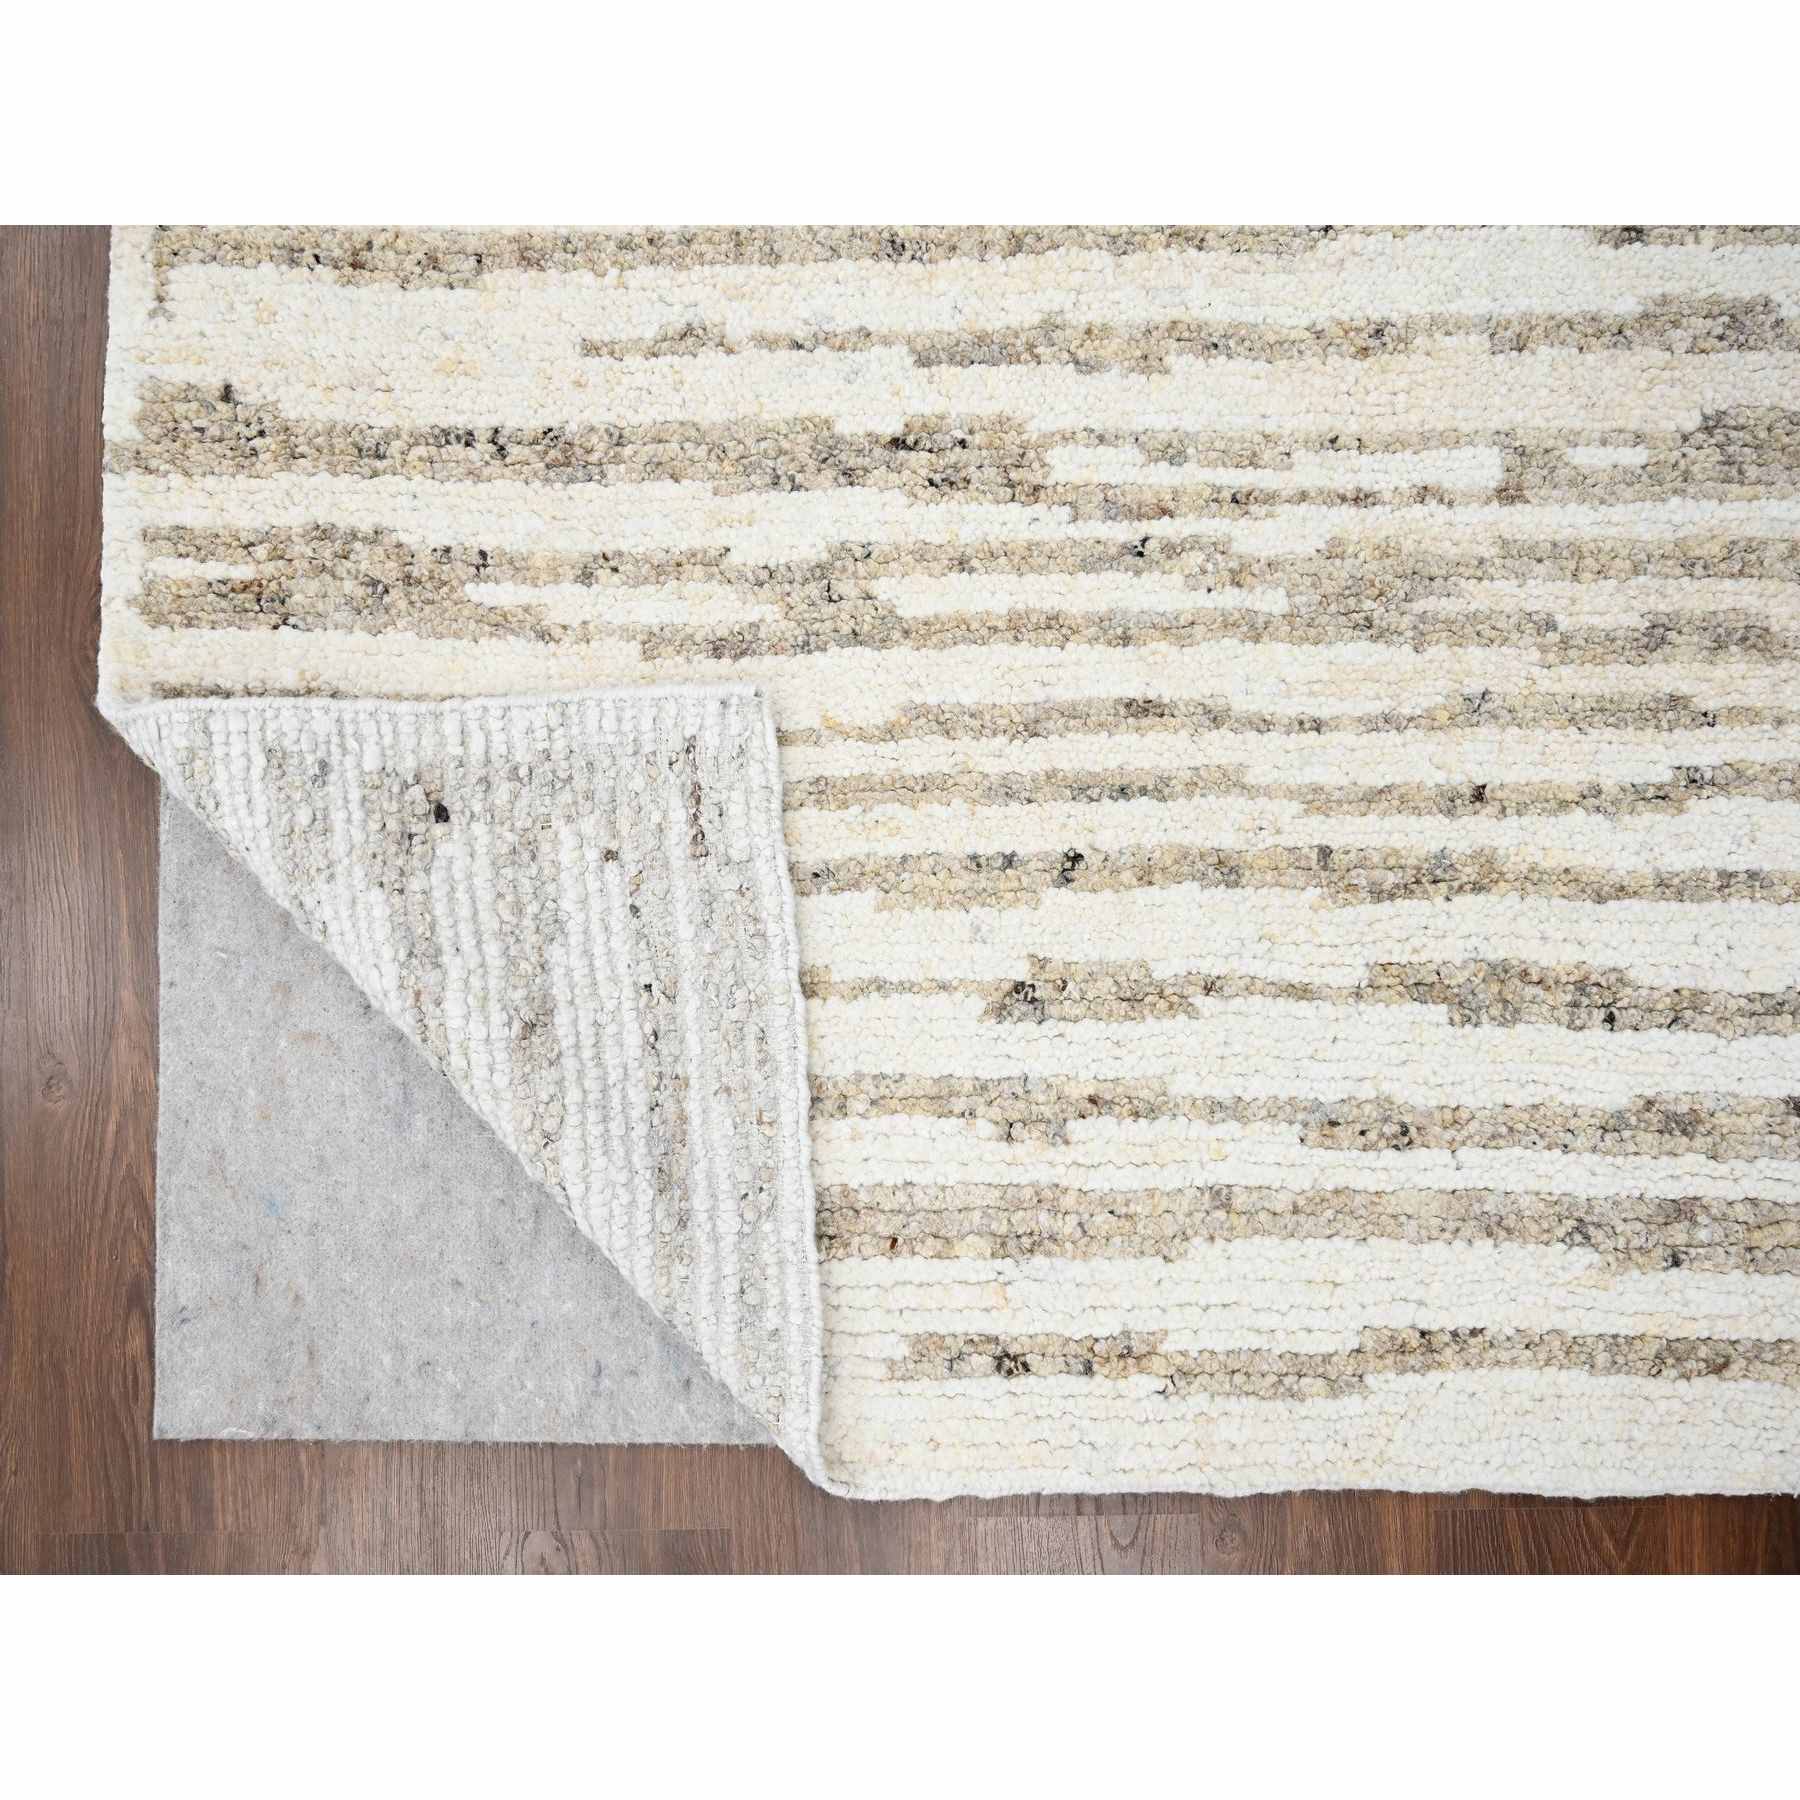 Modern-and-Contemporary-Hand-Knotted-Rug-422235